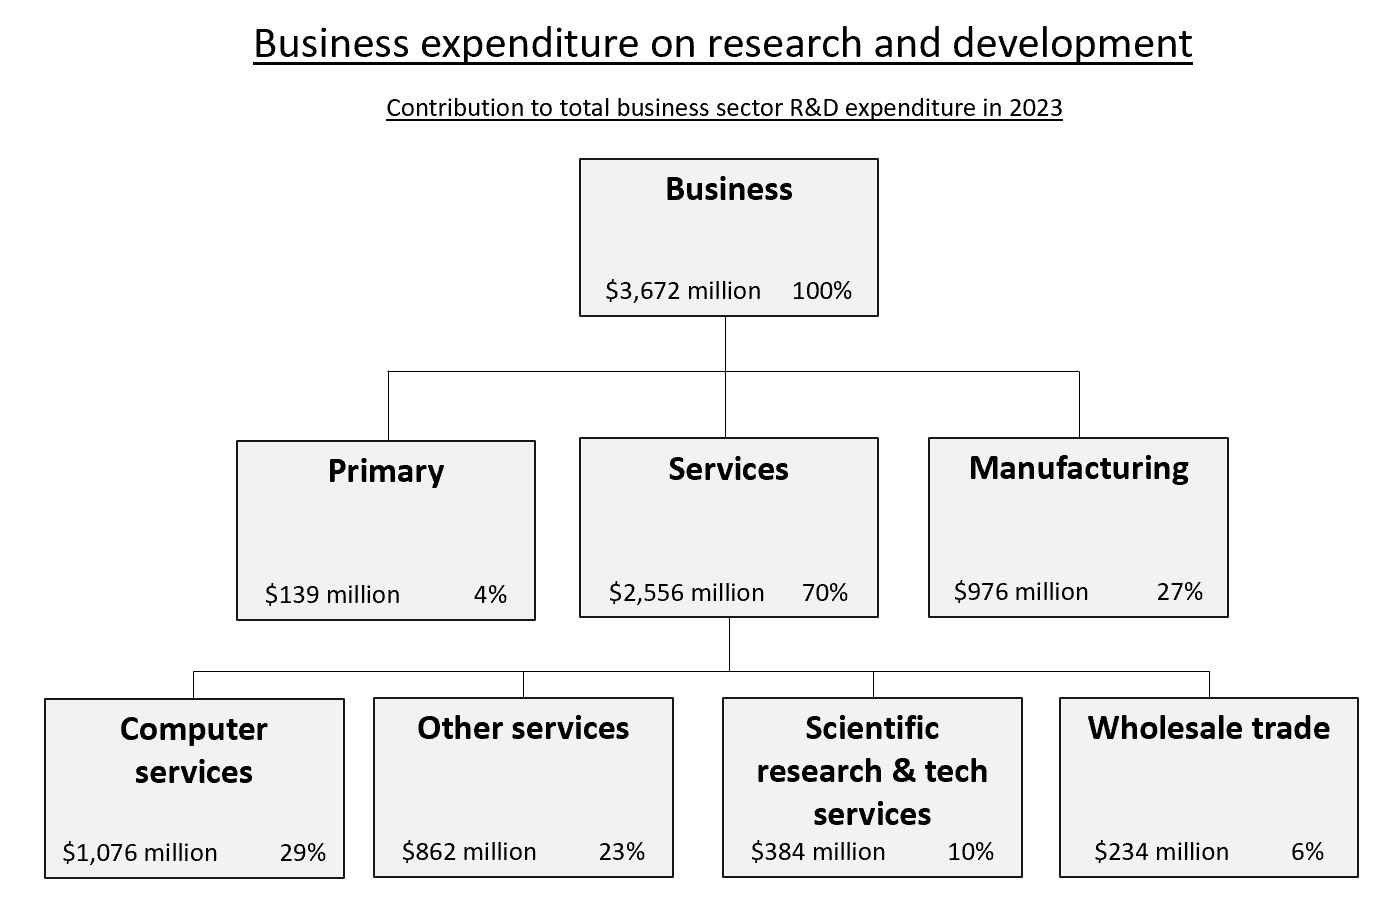 Diagram showing business expenditure on research and development, contribution to total business sector R&D expenditure in 2023. Text alternative available below diagram.